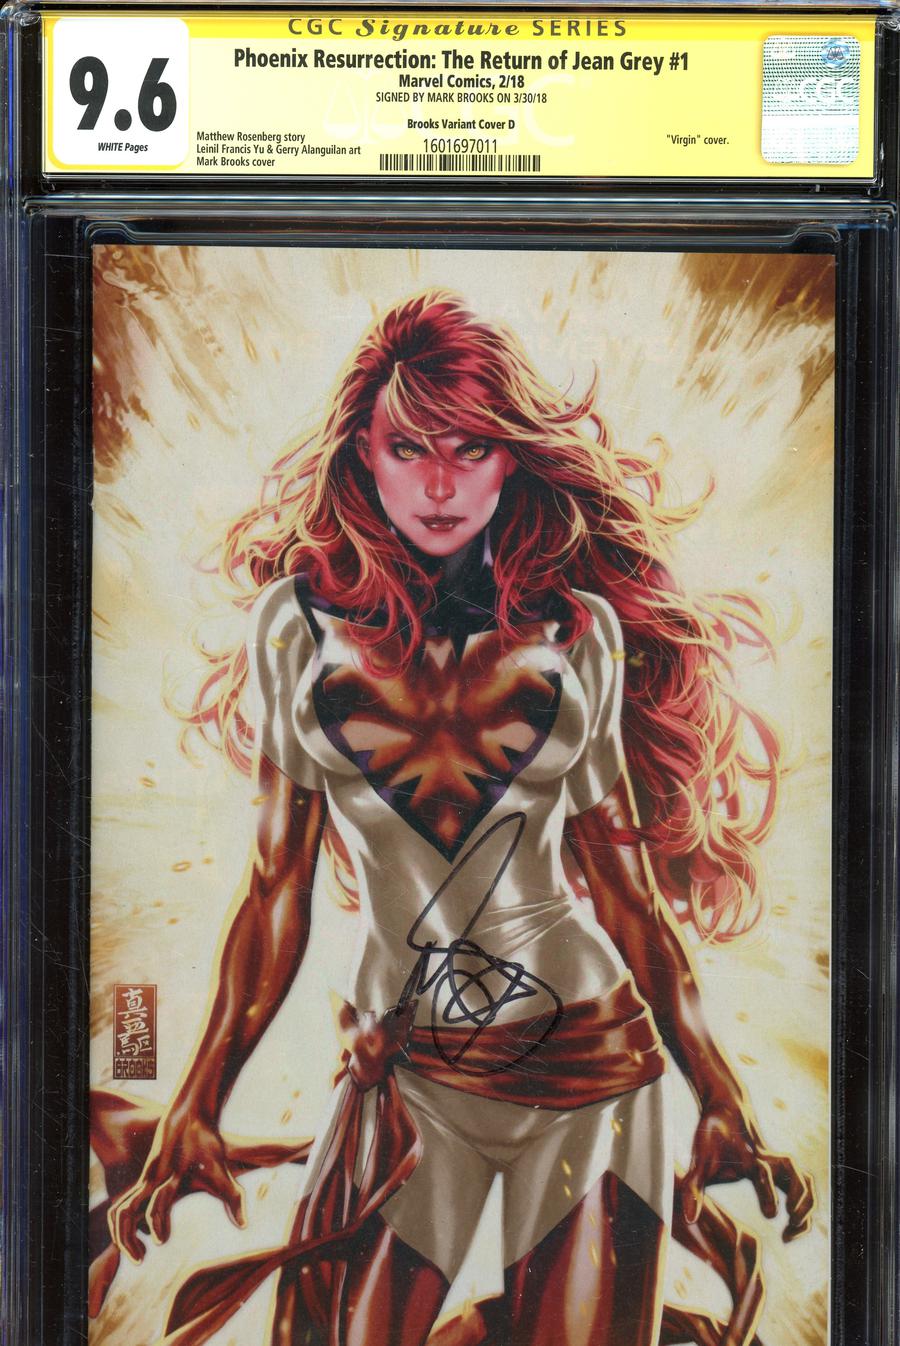 Phoenix Resurrection Return Of (Adult) Jean Grey #1 Cover W Incentive ComicSketchArt White Costume Virgin Cover Signed By Mark Brooks CGC 9.6